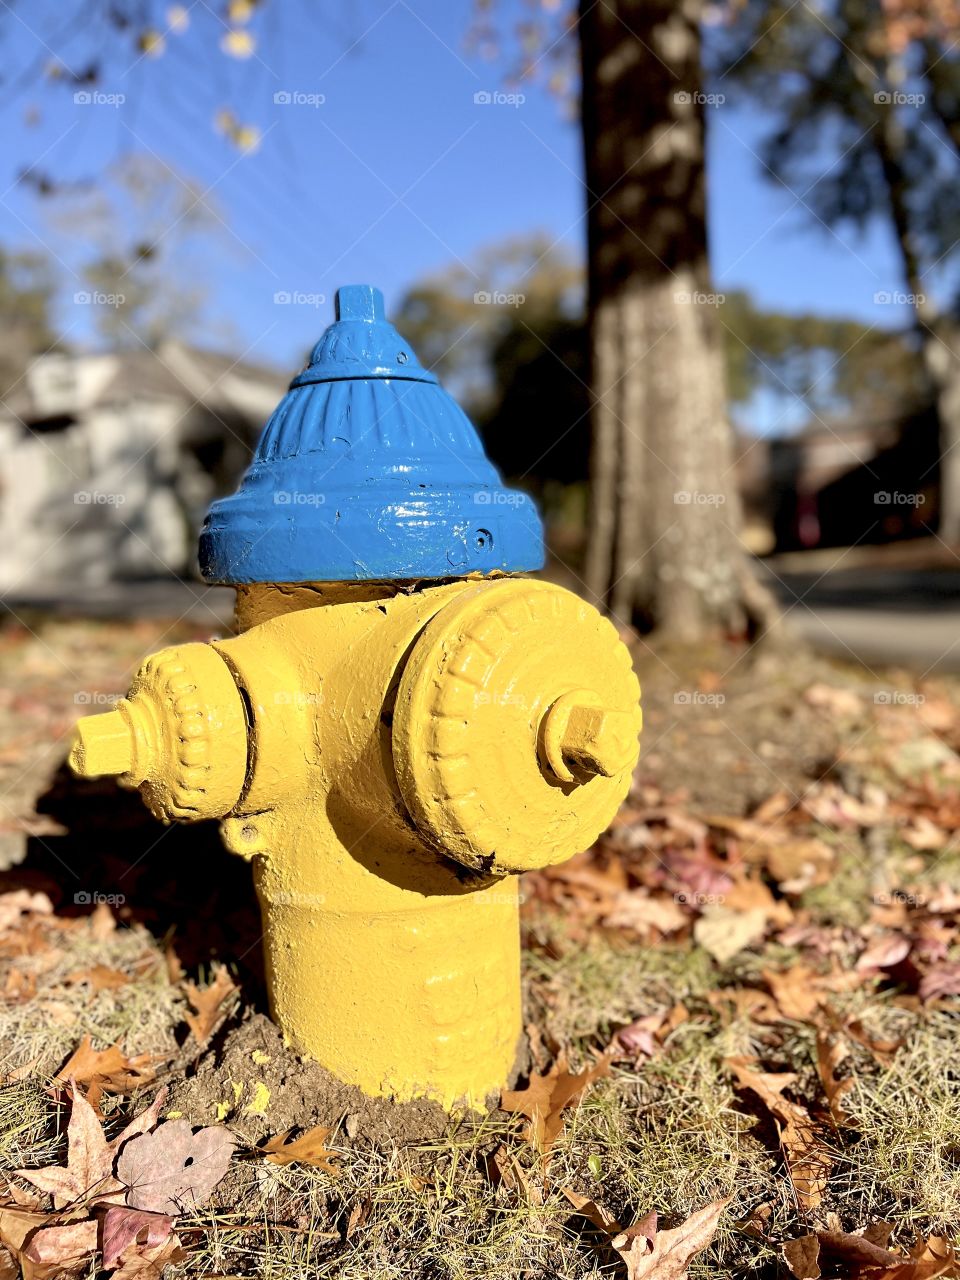 Bright yellow and blue fire hydrant in neighborhood 